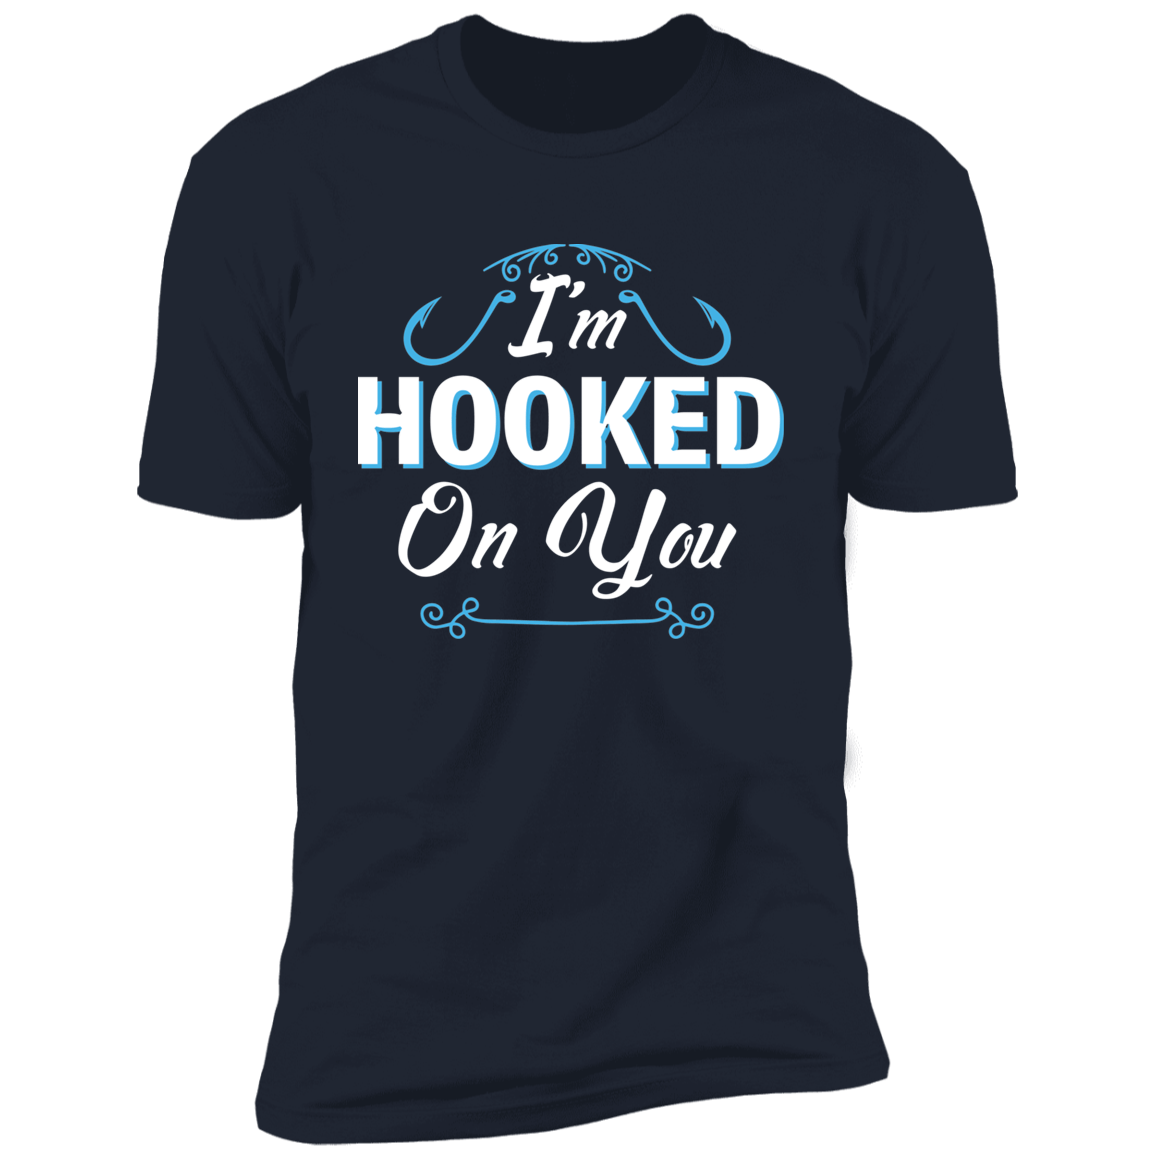 Out Of All The Fish I'm Hooked On You Couples Fishing Shirts